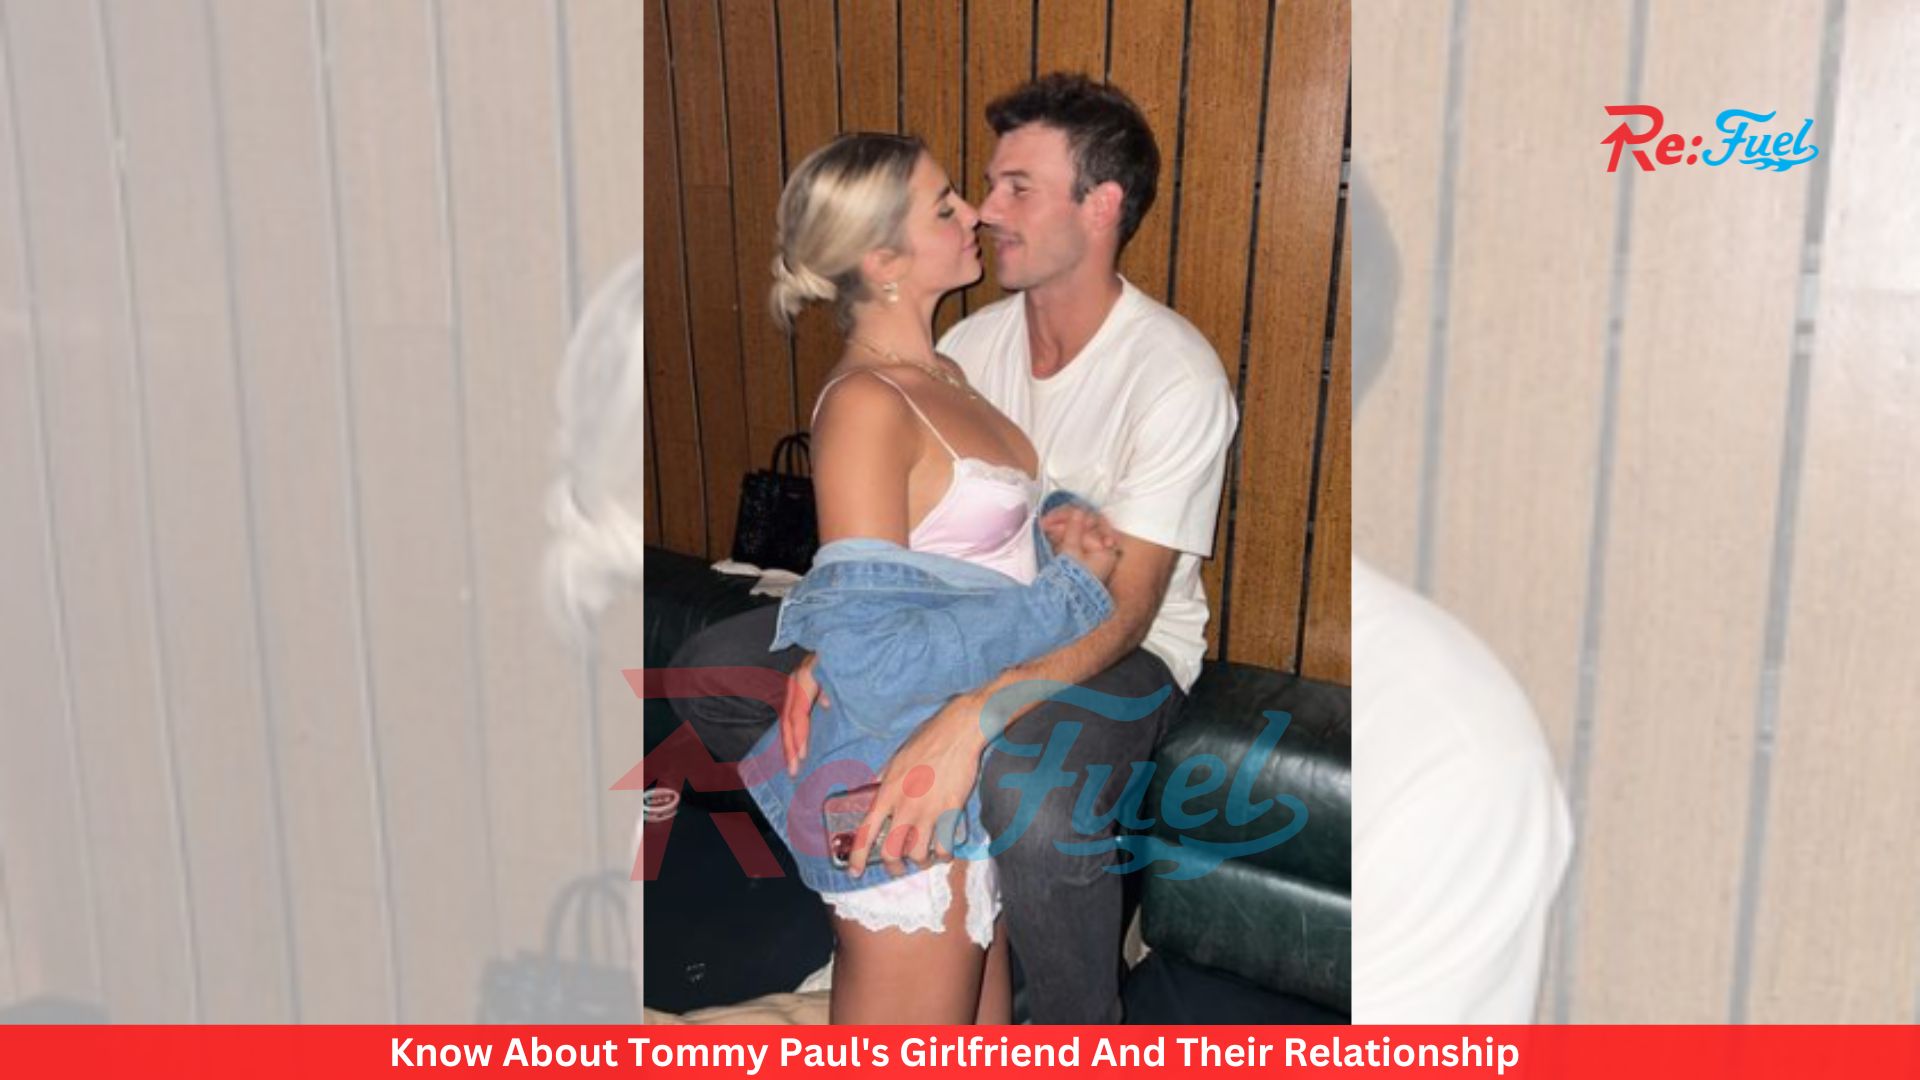 Know About Tommy Paul's Girlfriend And Their Relationship